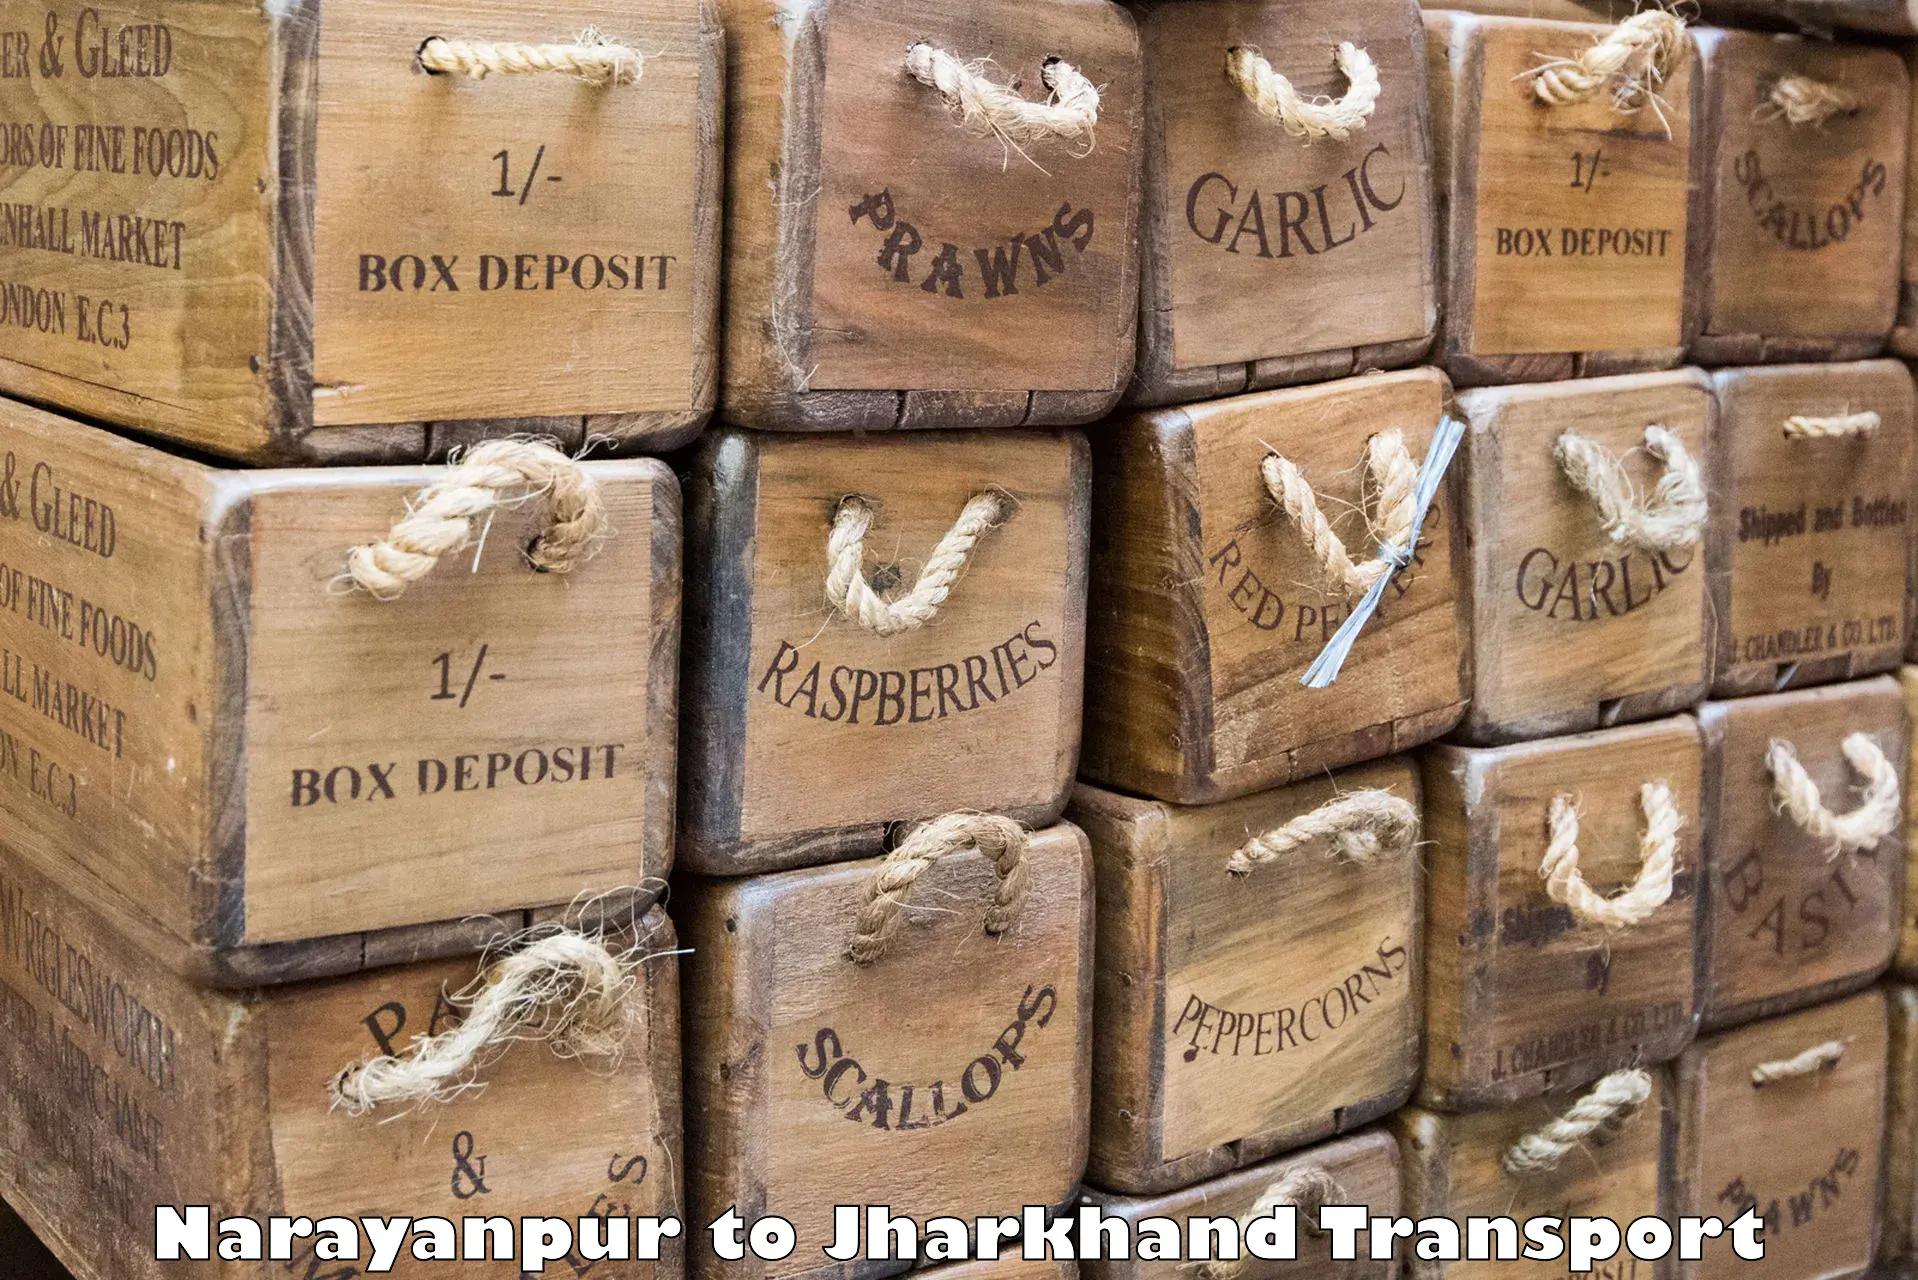 Container transport service Narayanpur to Domchanch